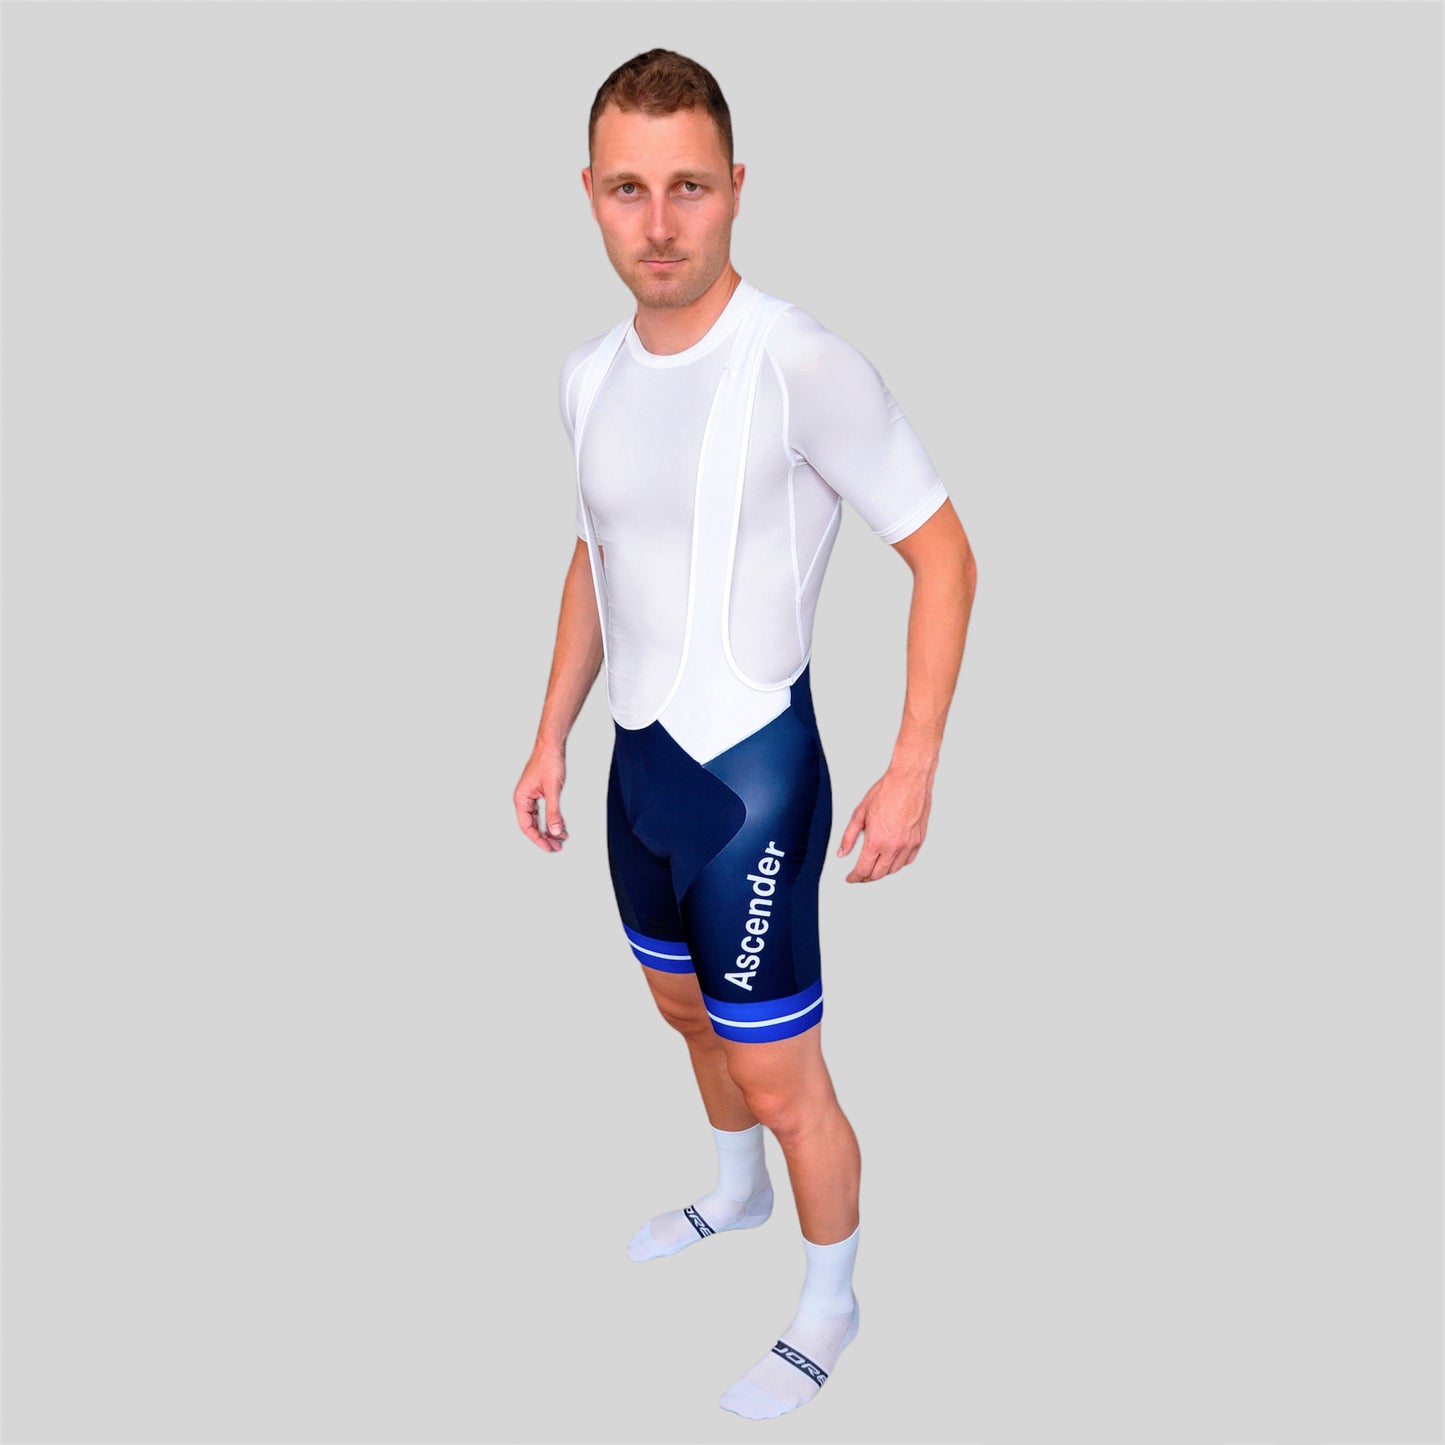 Mountain Edition Bibshort Blue from Ascender Cycling Club Zürich and Cuore of Switzerland Global Ascender View